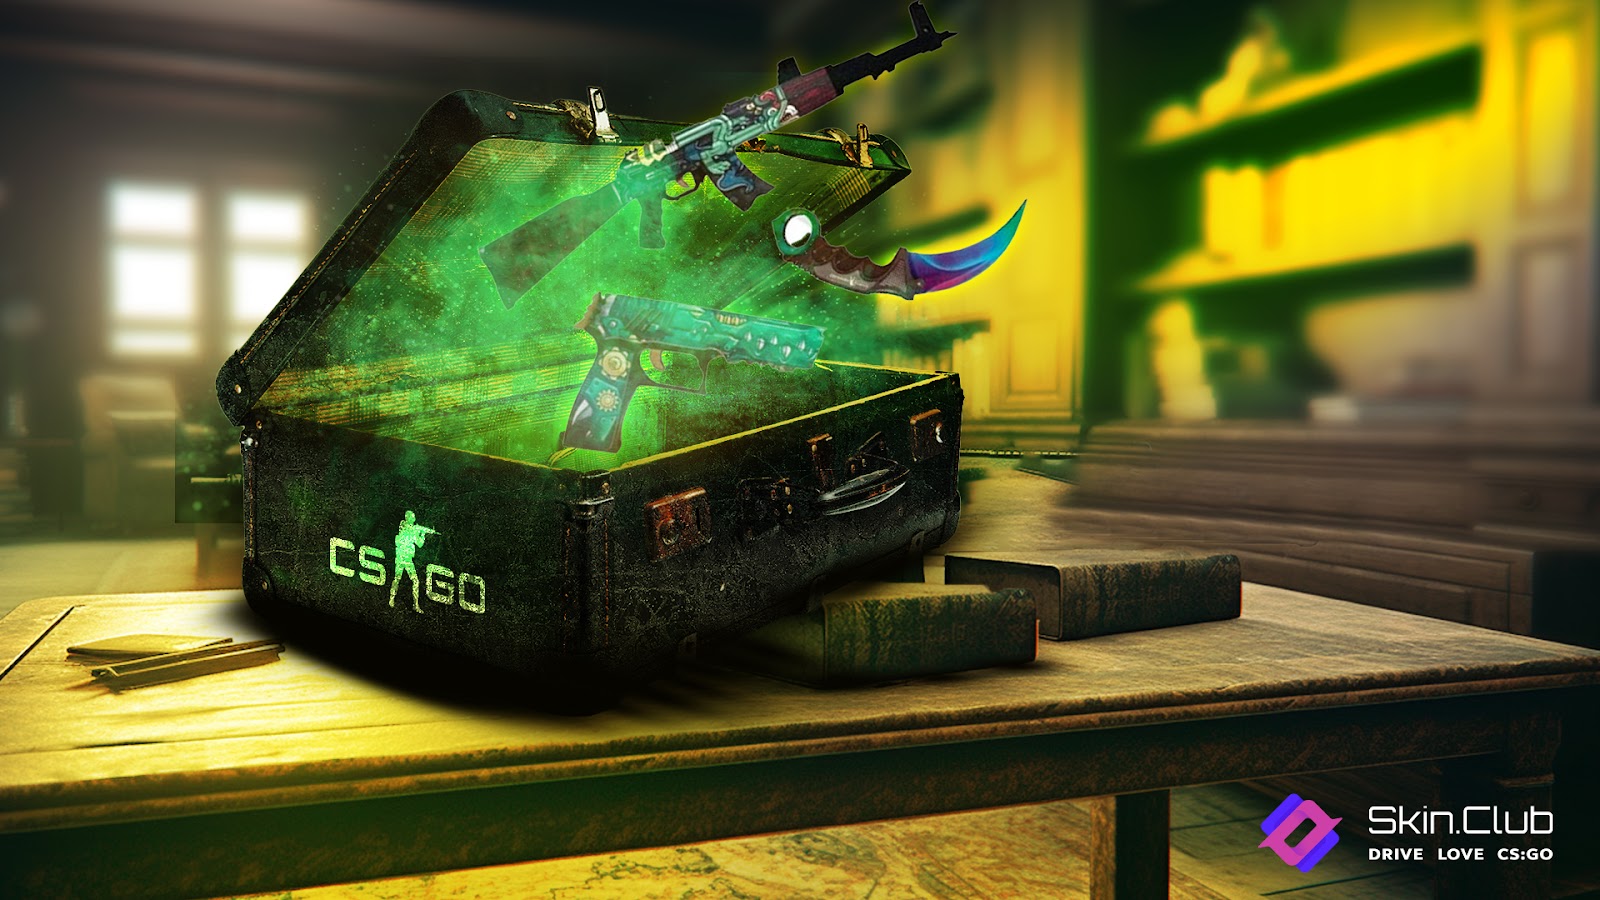 New CS:GO Case Released: What Skins Can You Expect?